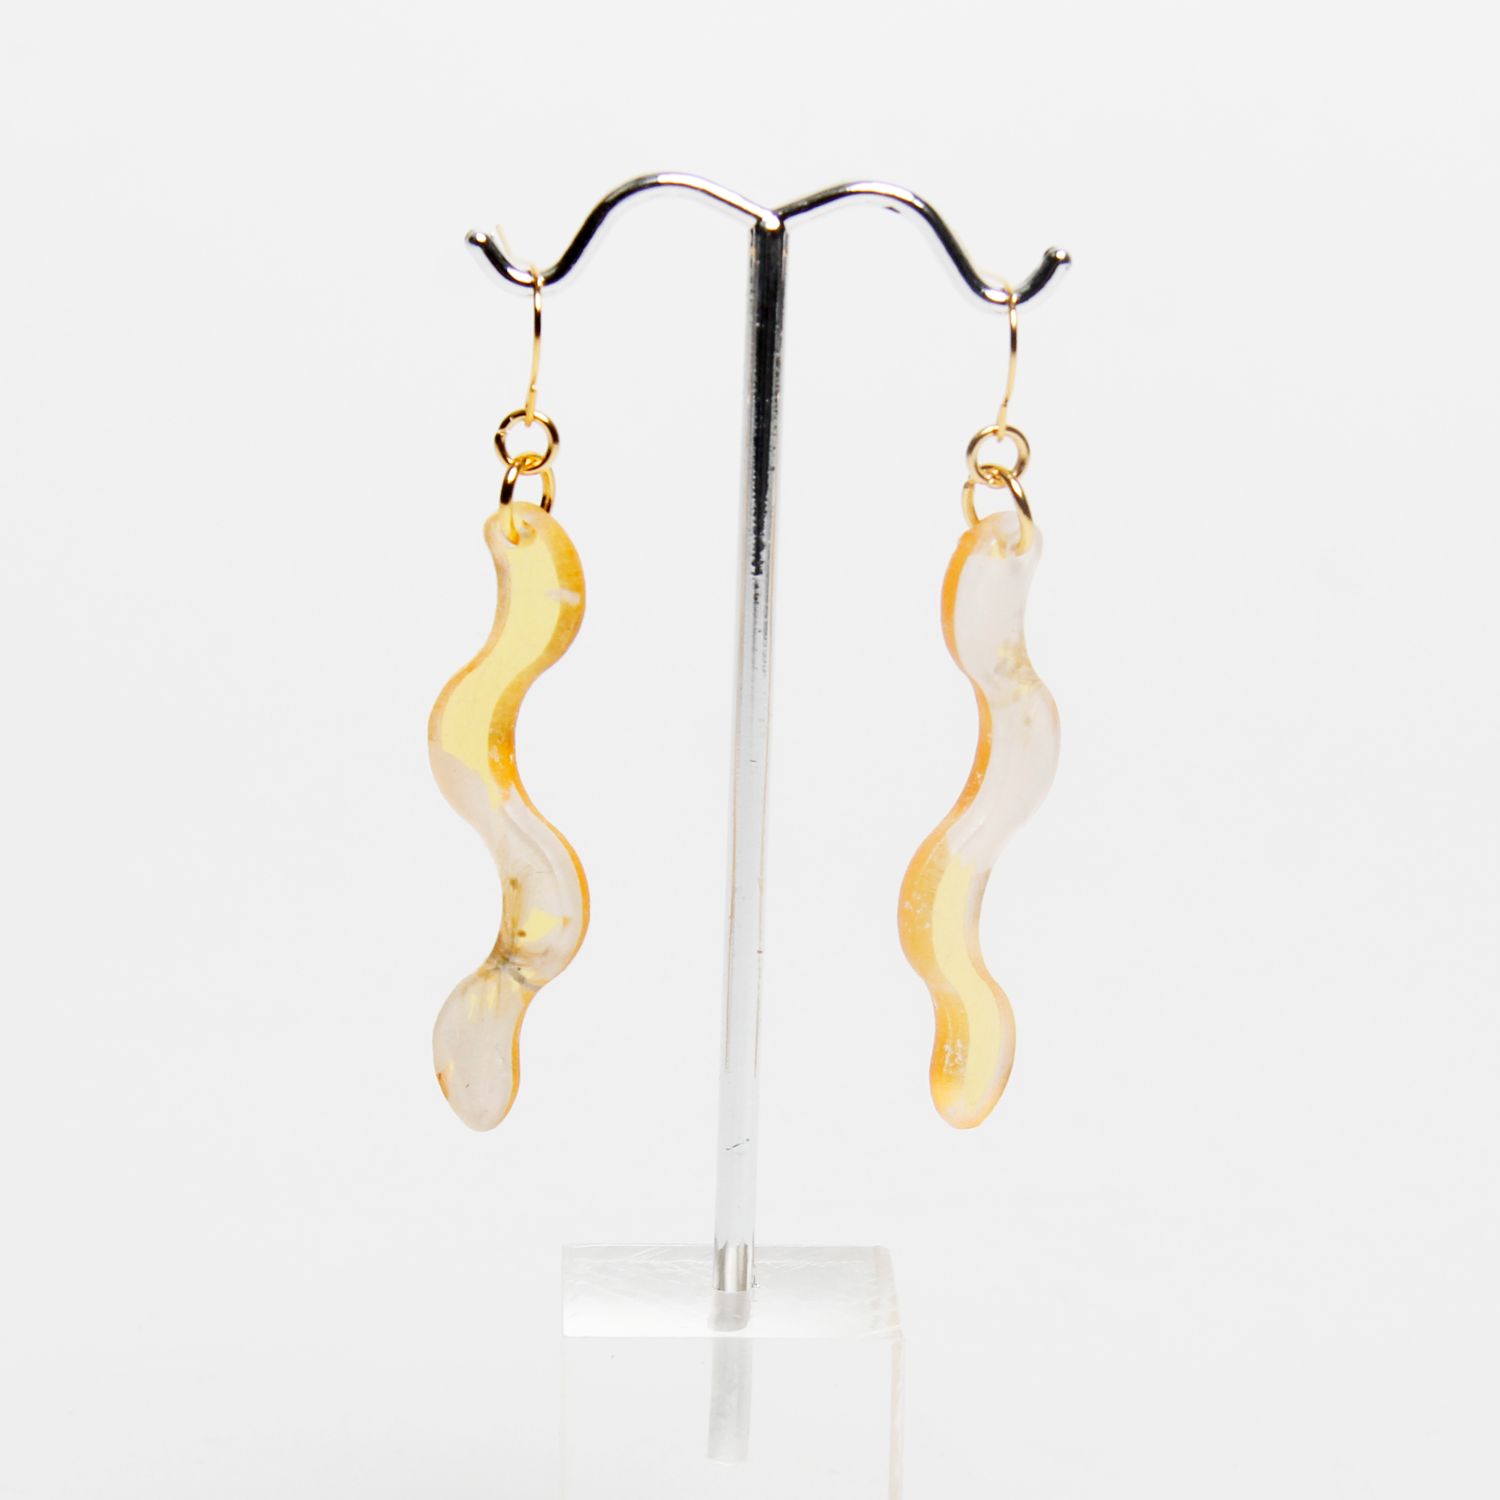 Dconstruct: Short Yellow Squiggle Earrings Product Image 1 of 1